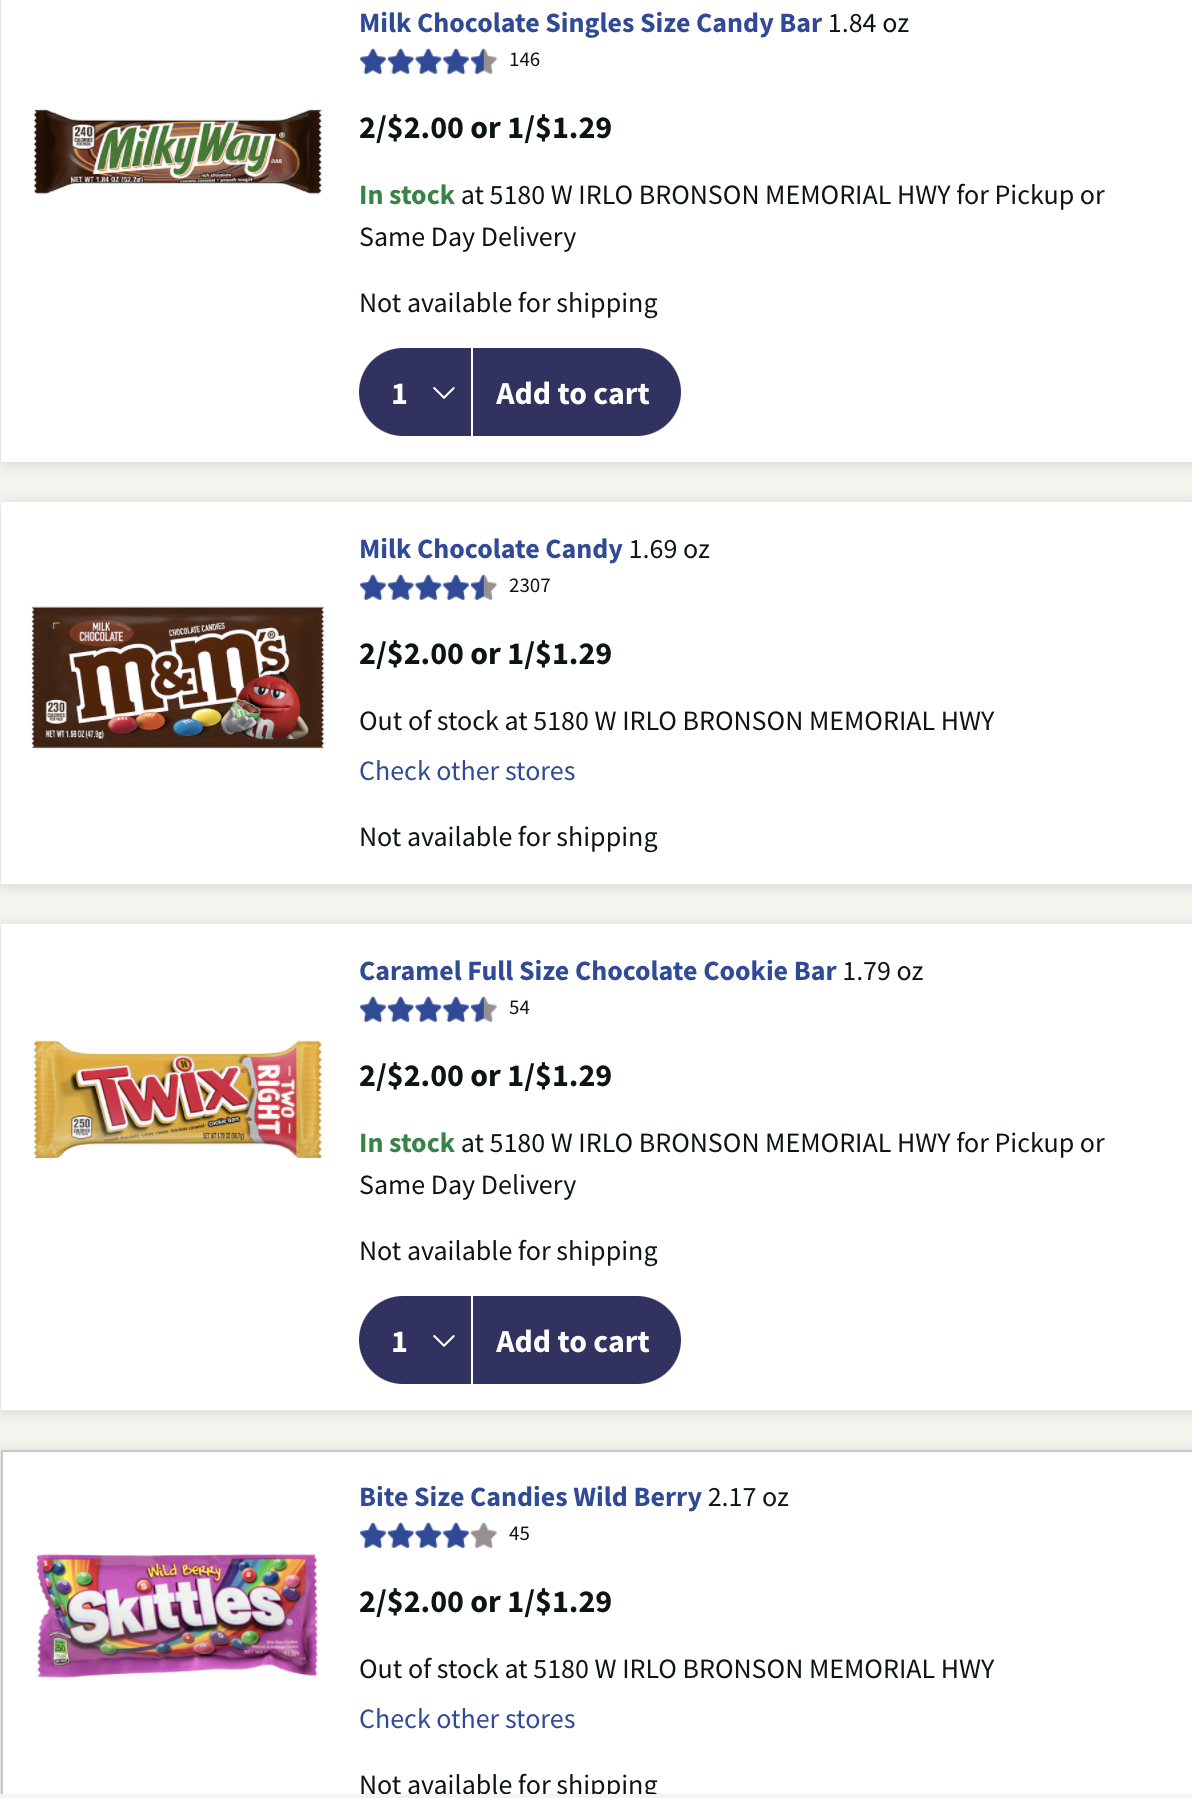 Single Candy Bars On Sale Now At Walgreens!